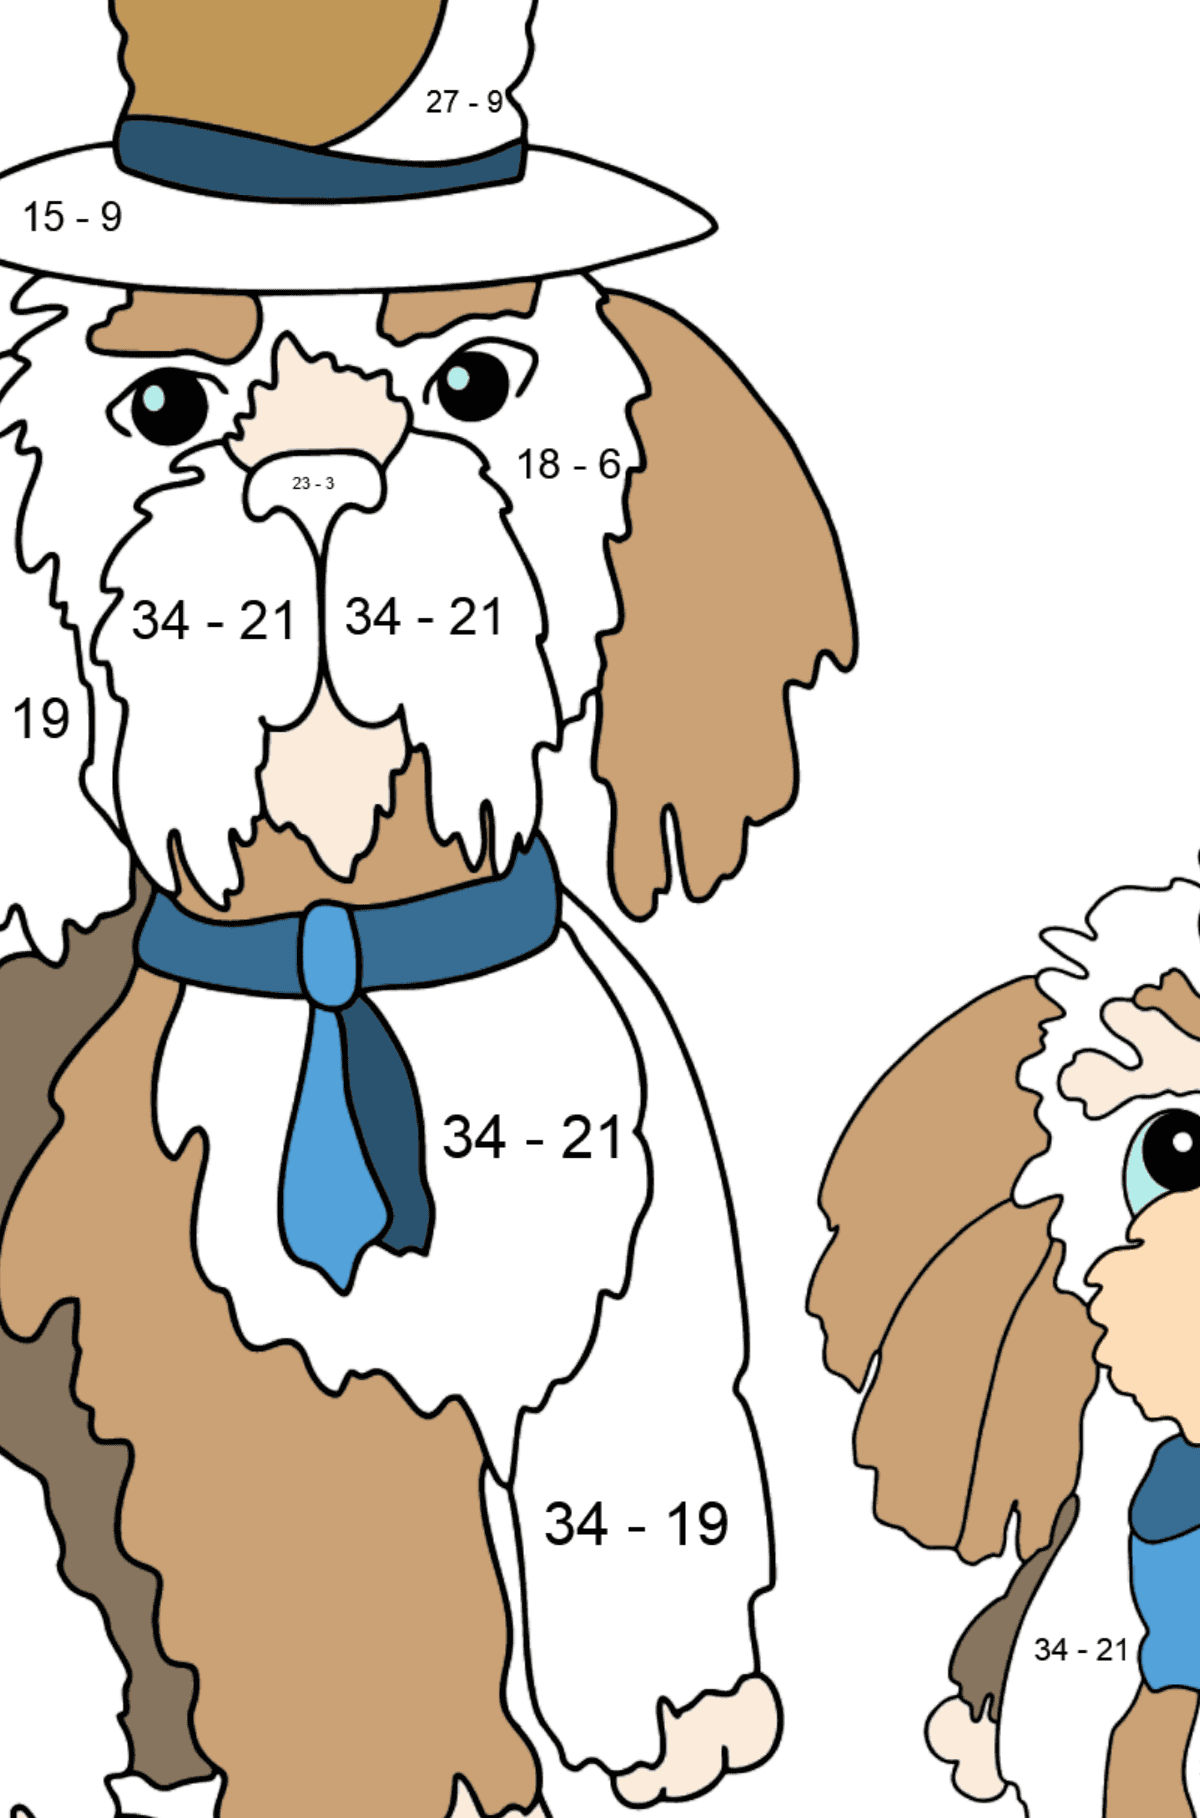 Coloring Page - Dogs are Sitting Wearing Hats - Math Coloring - Subtraction for Kids